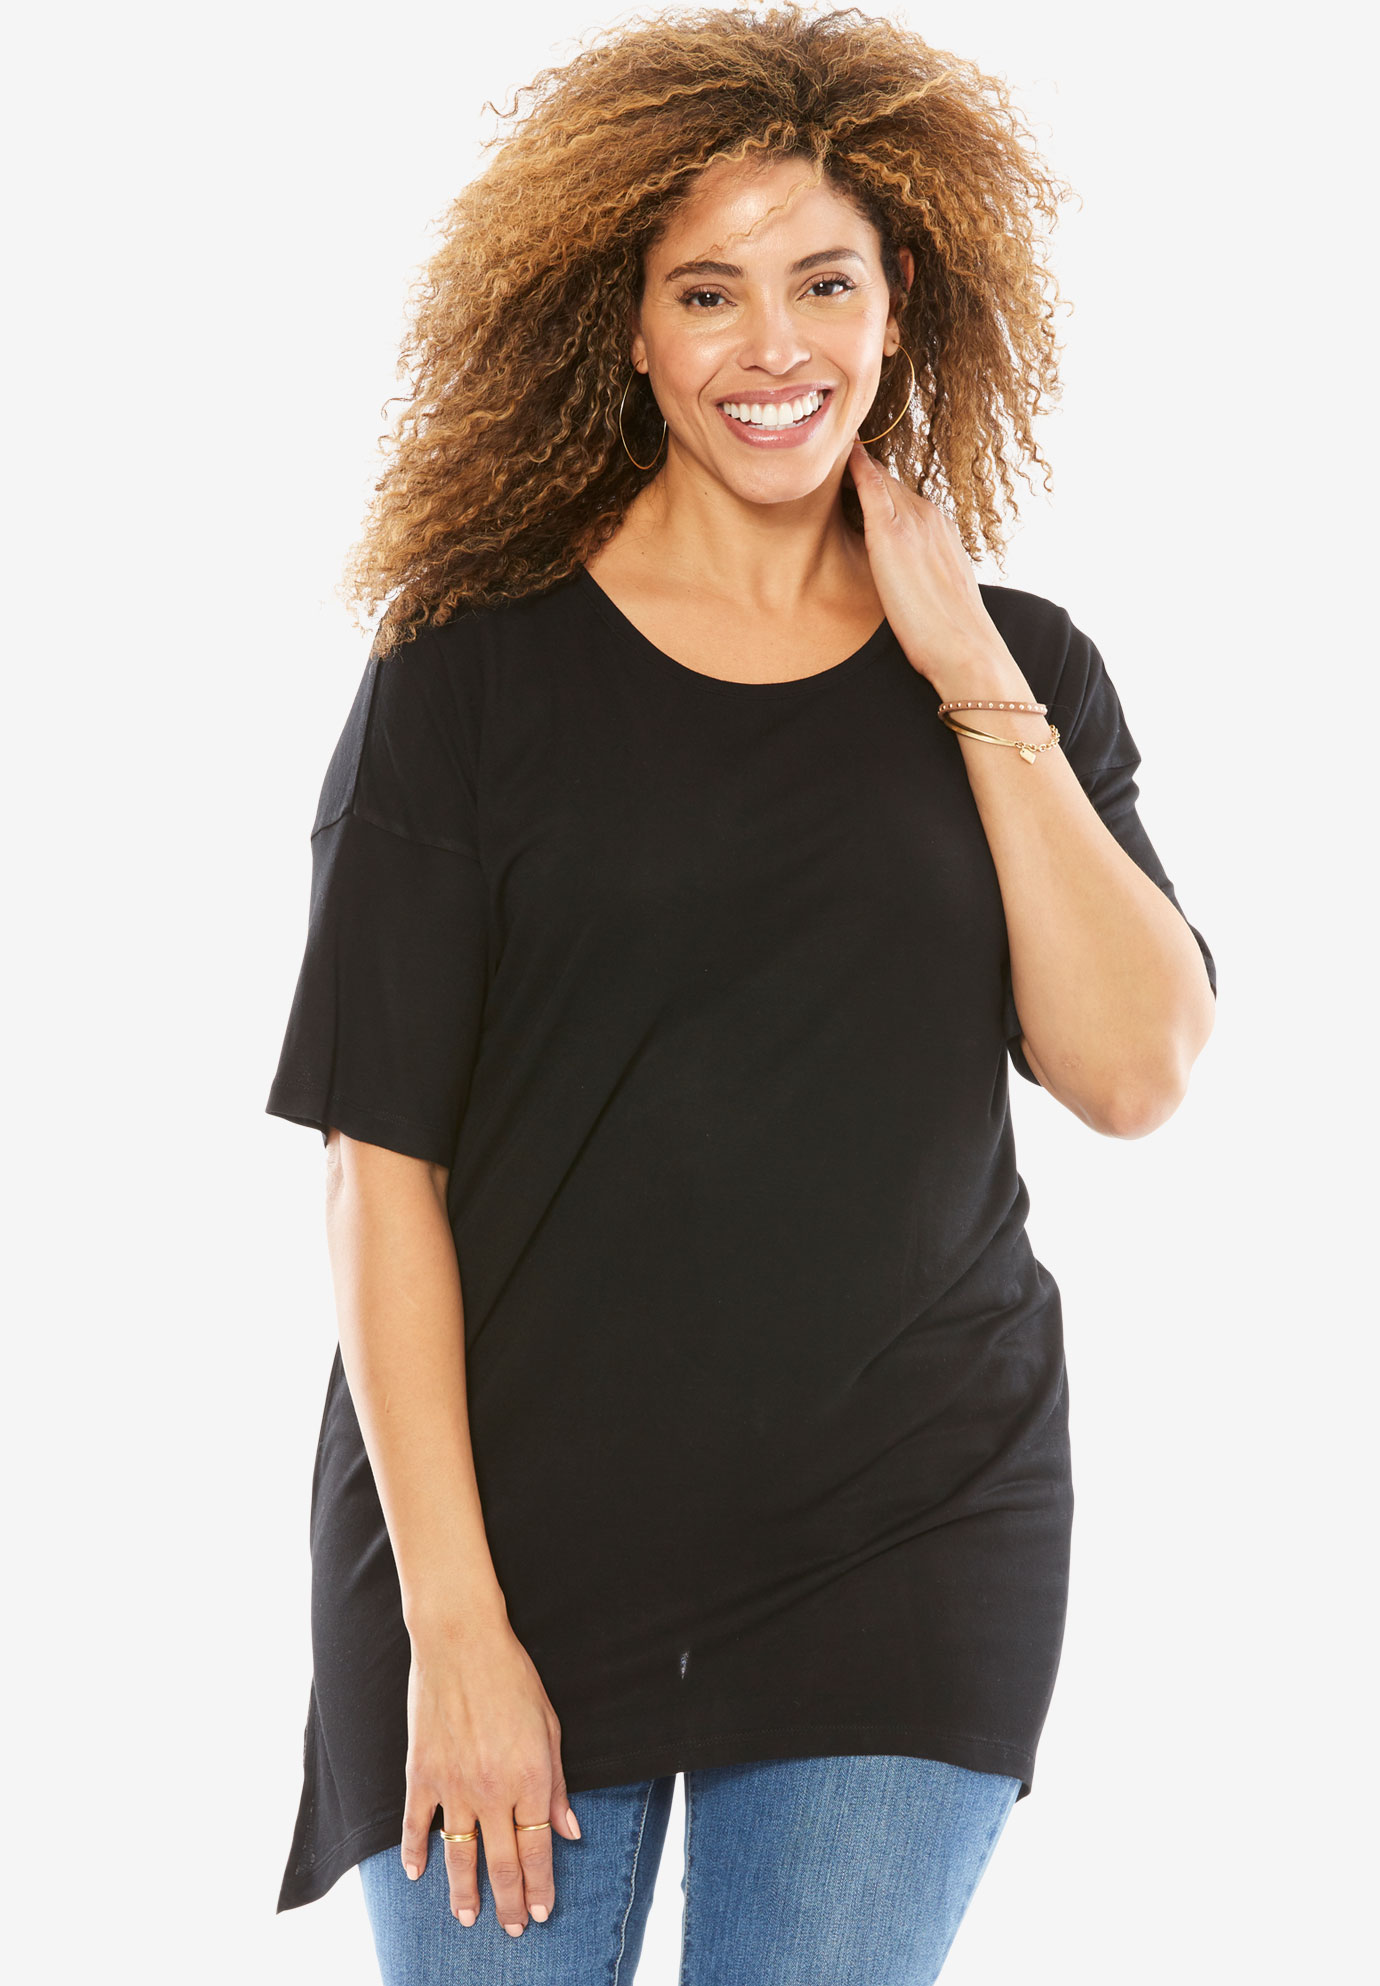 Shark Bite Tee| Plus Size Tops | Woman Within